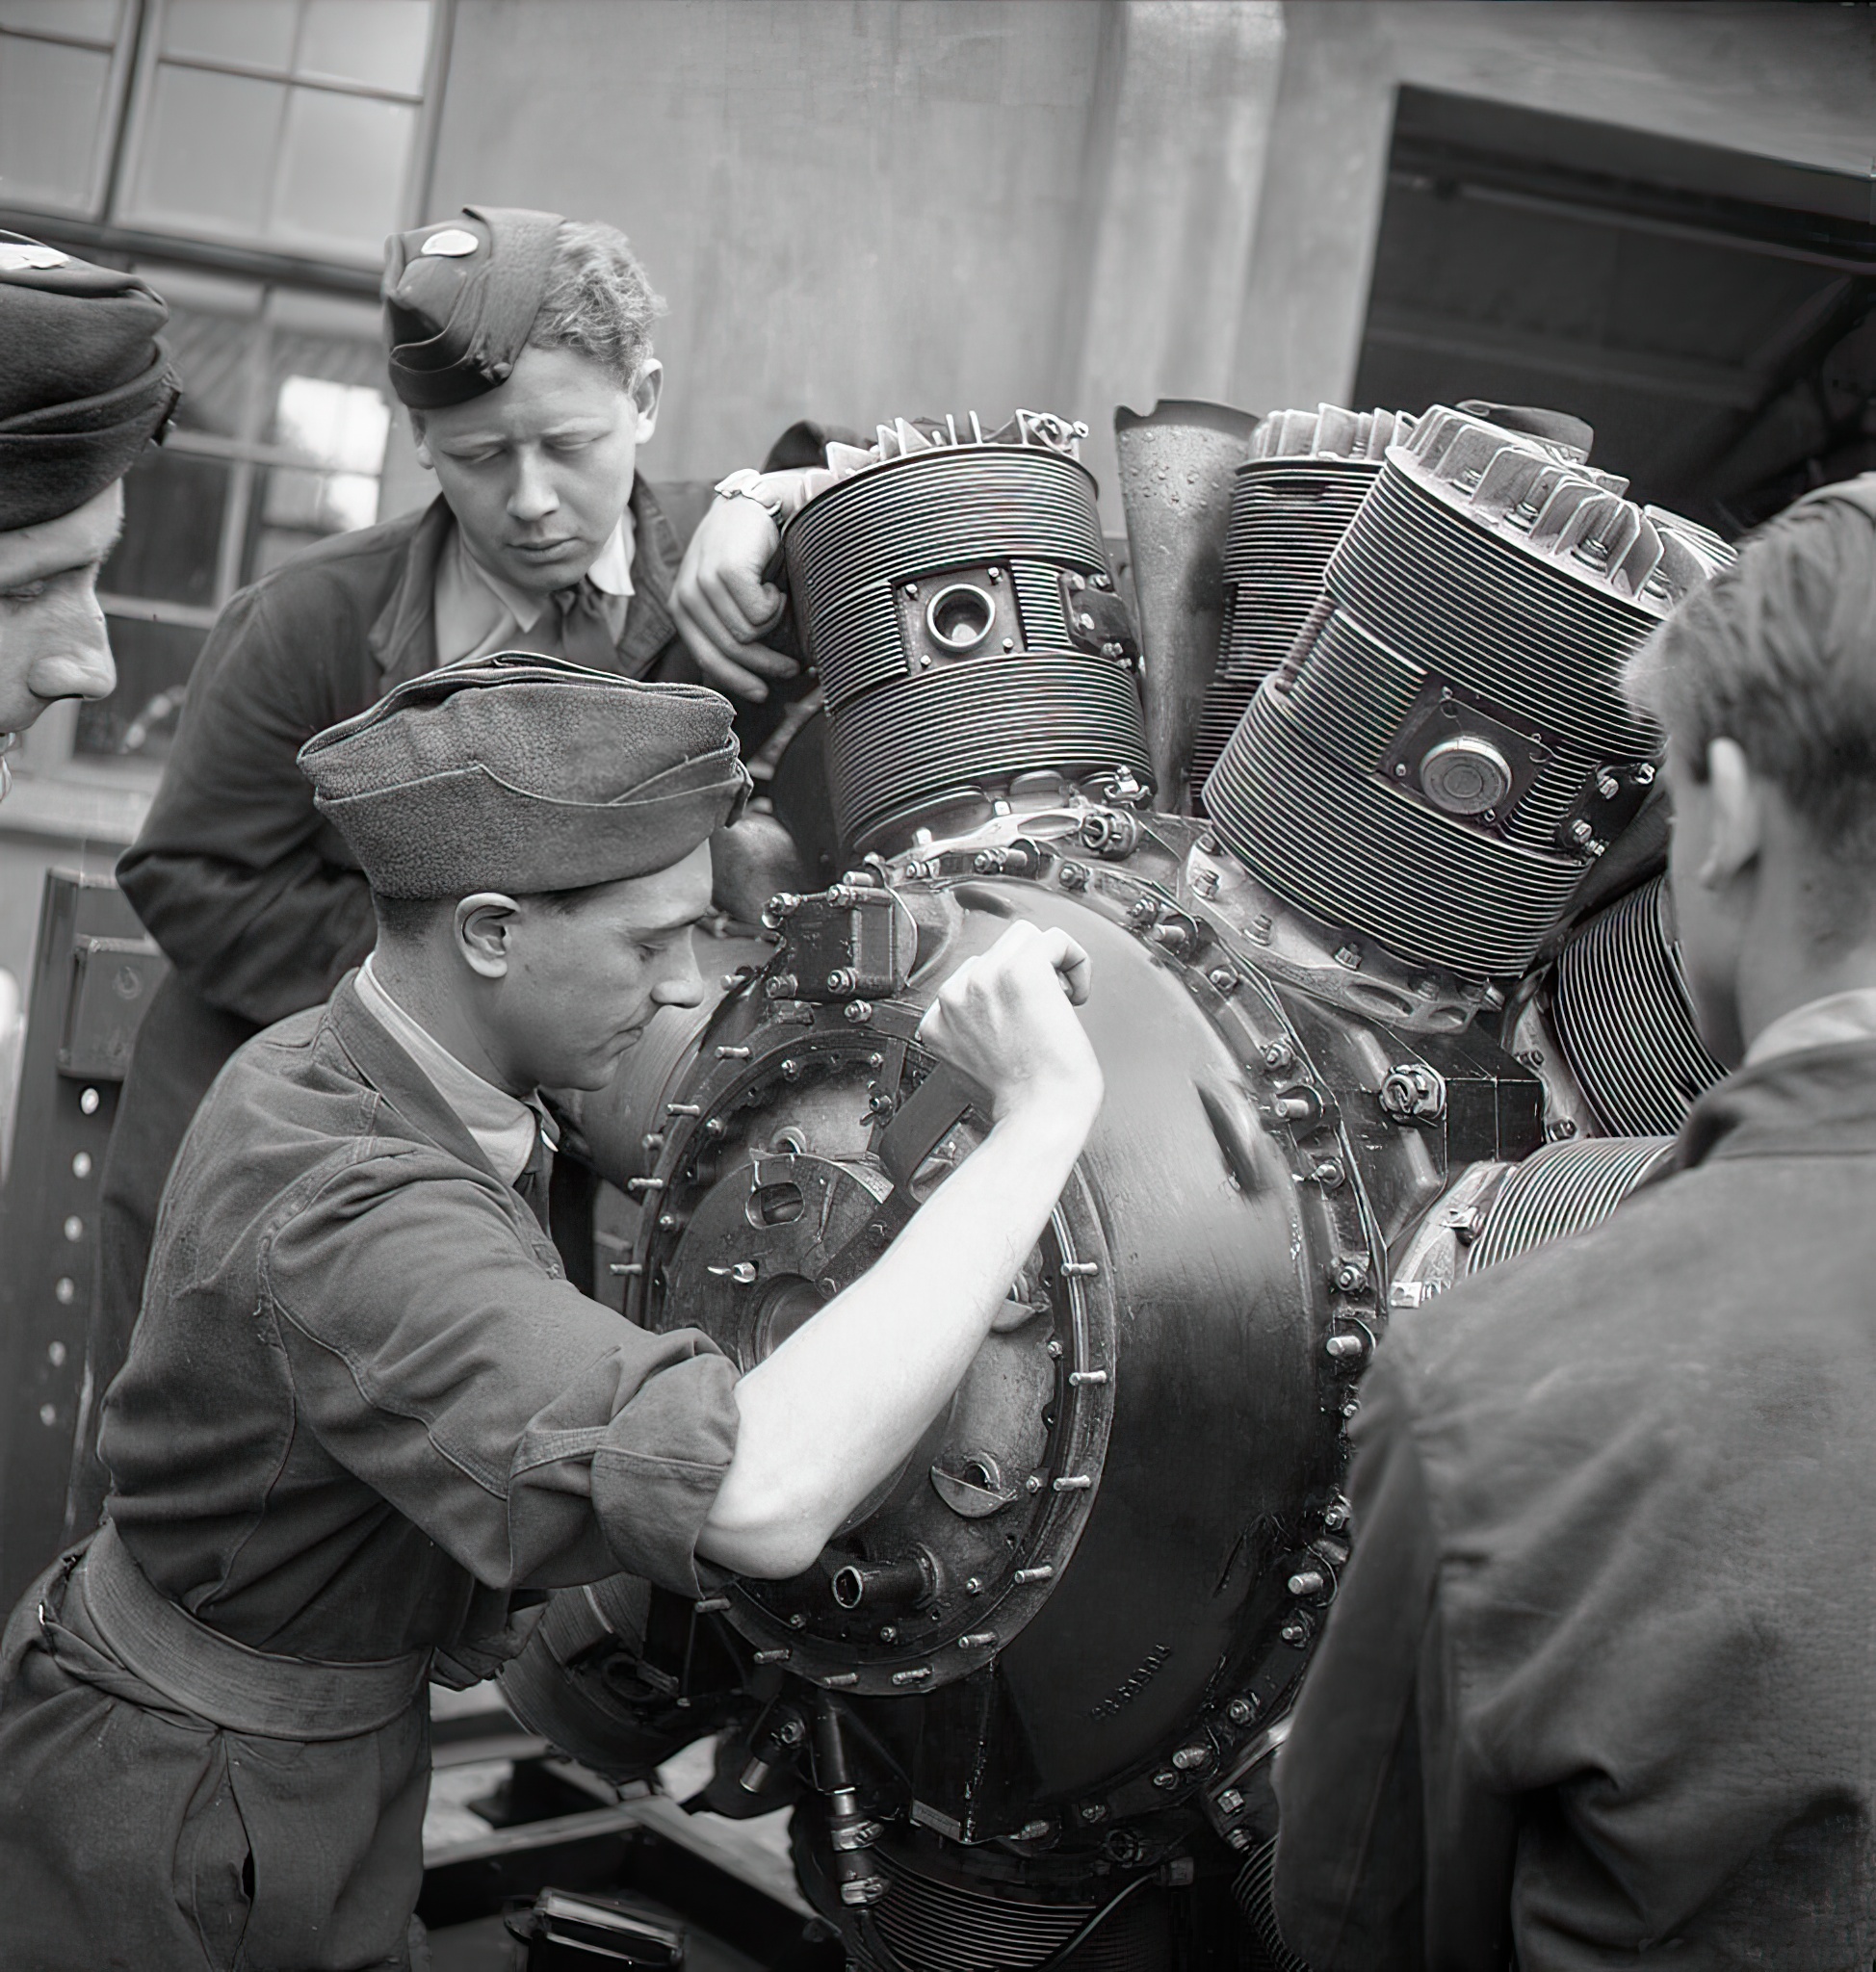 Belgian trainees at work on a Hercules aero-engine at the Belgian Air Training School at Snailwell in Cambridgeshire, 1945